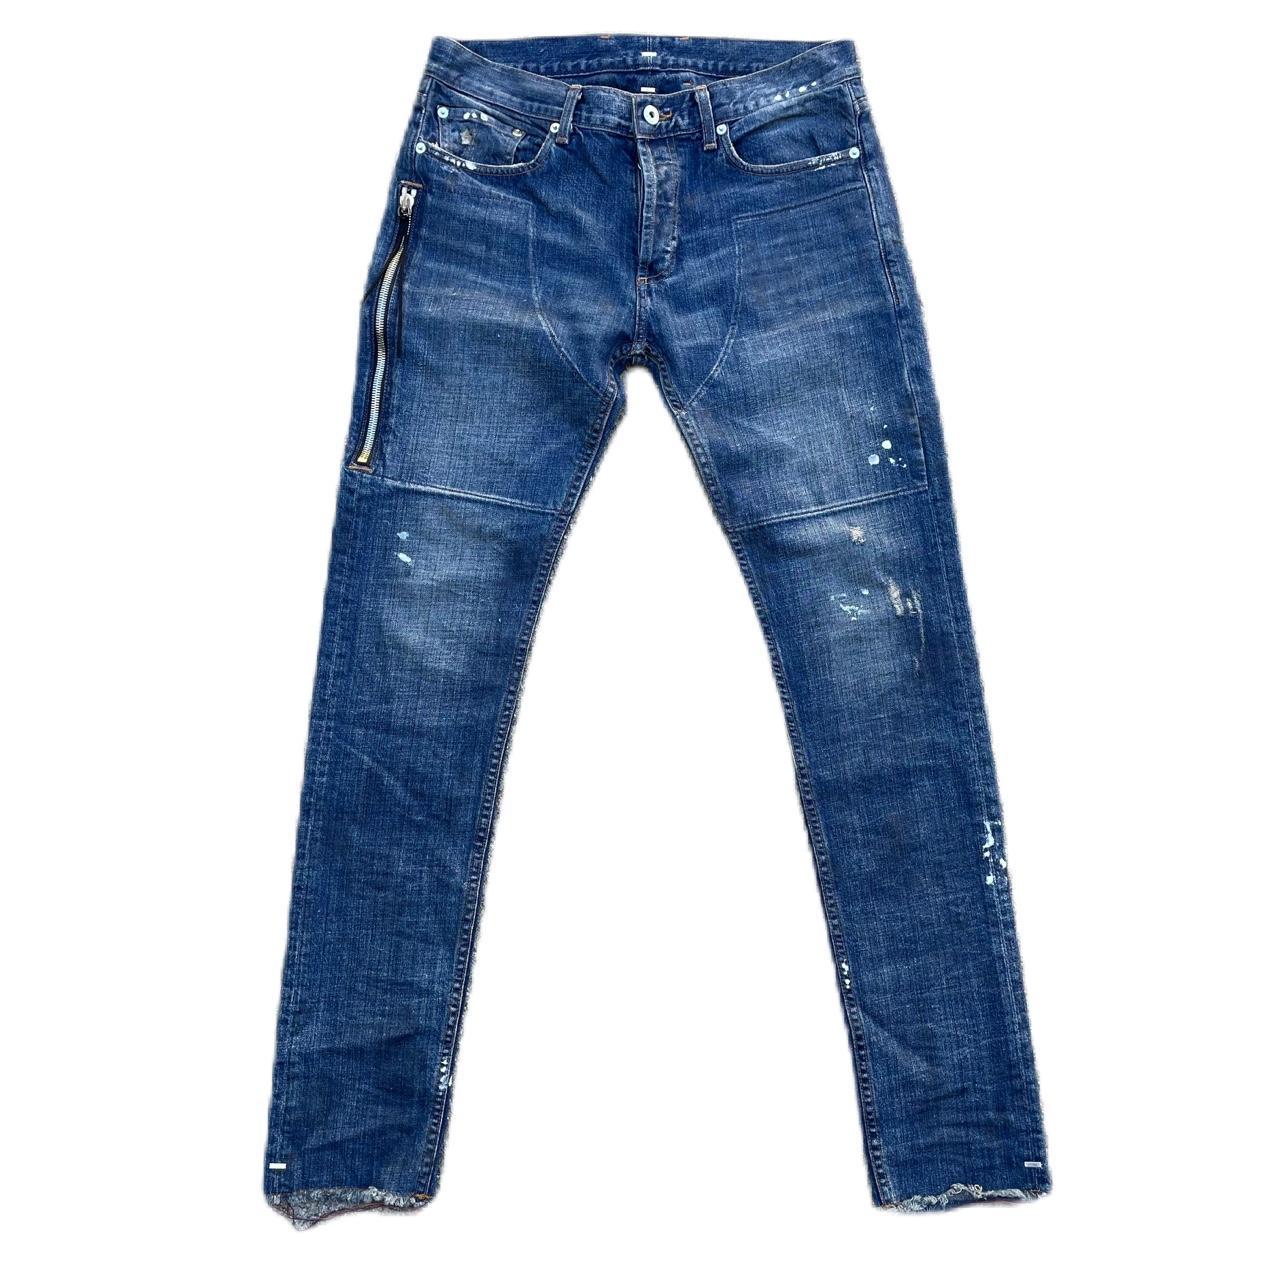 Mr.Completely Men's Blue and White Jeans